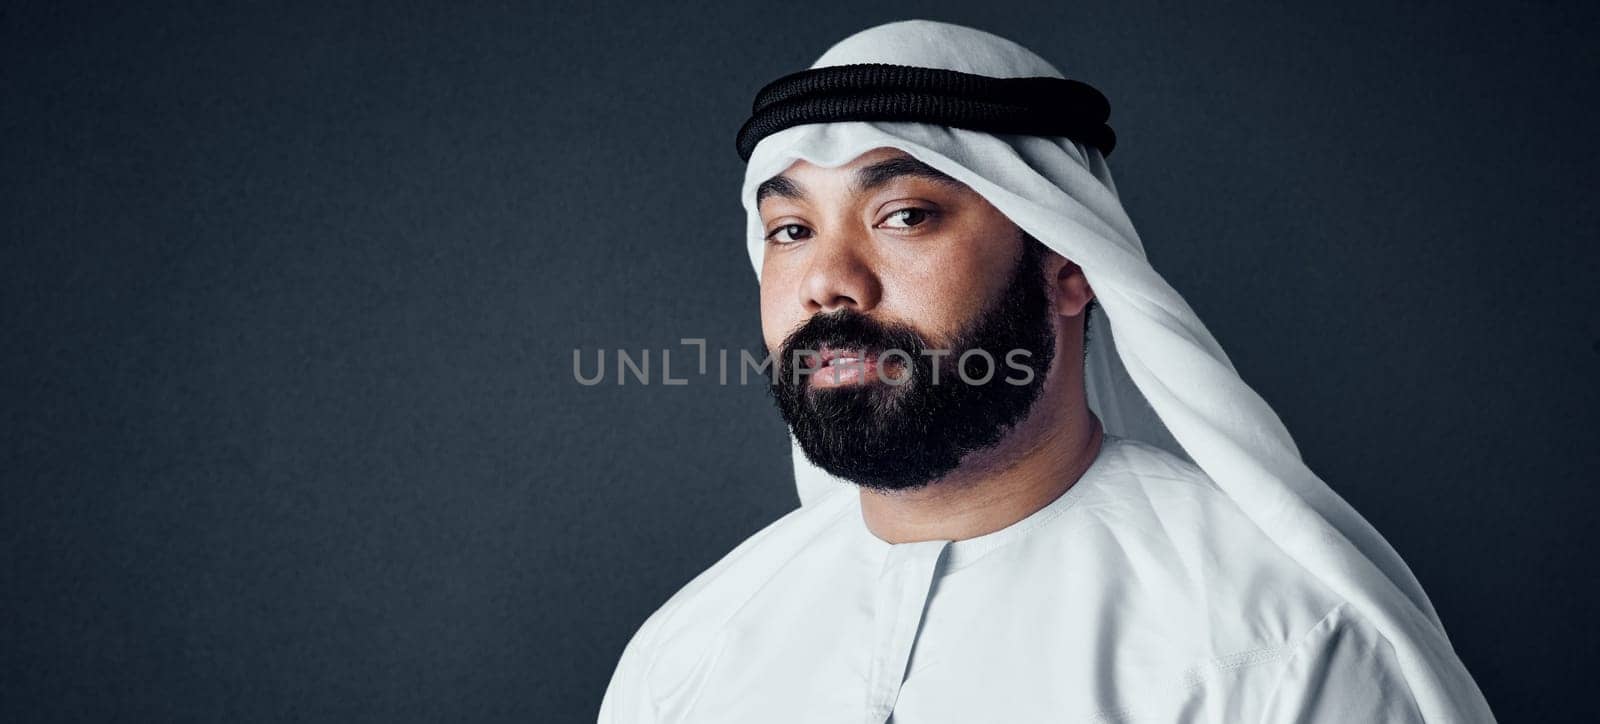 He loves the traditional look. Studio shot of a young man dressed in Islamic traditional clothing posing against a dark background